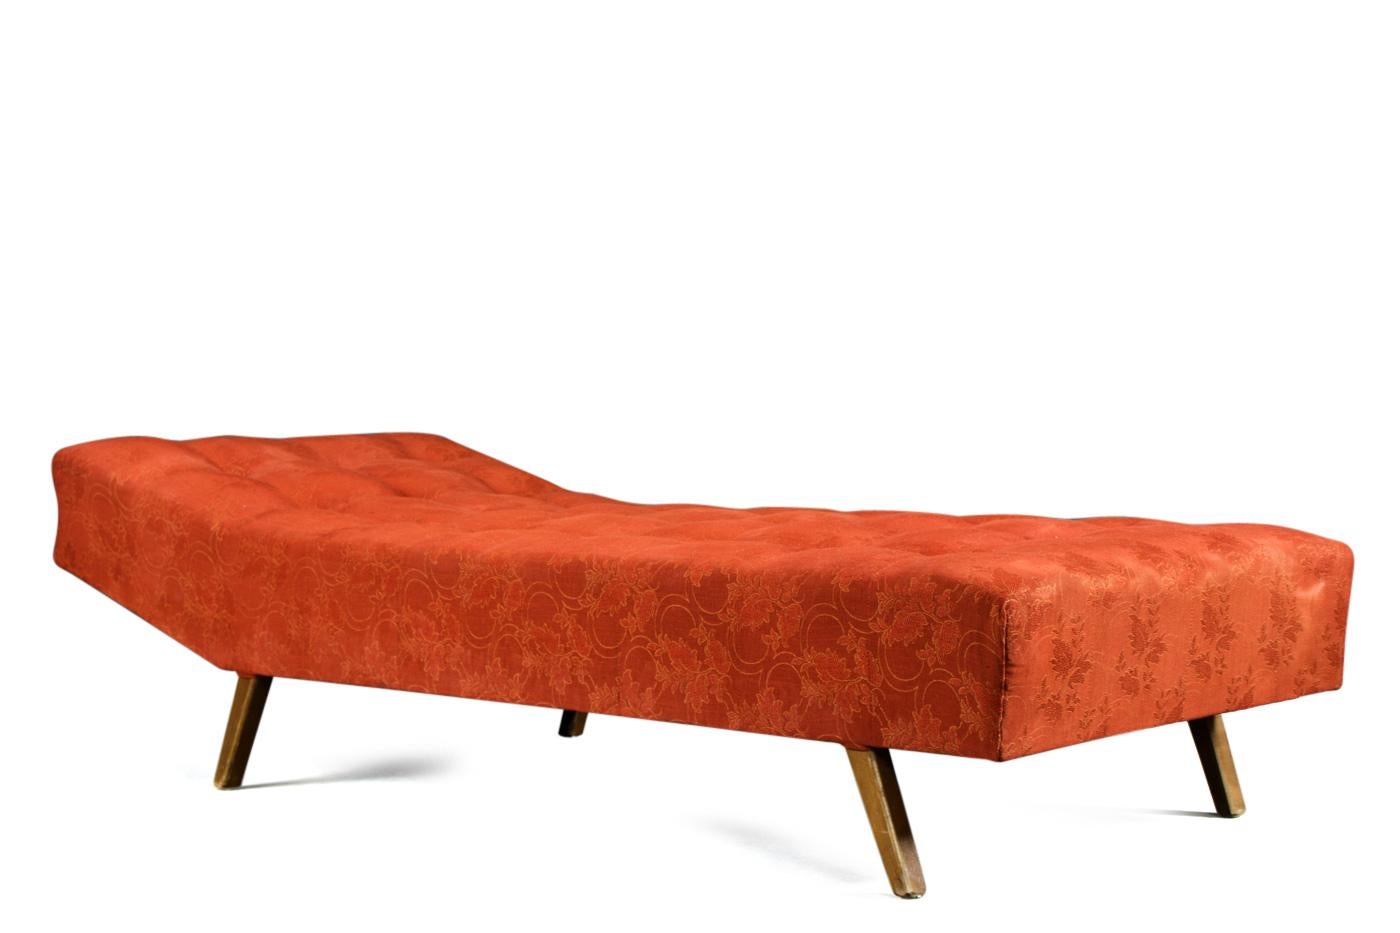 Bench, daybed design 1950s. Frame with thick padding, with feet shod with brass. Red upholstery fabrics with floral motifs. 
Dimensions ca: L. 193 cm, W 82 cm. 
With signs of age and wear.